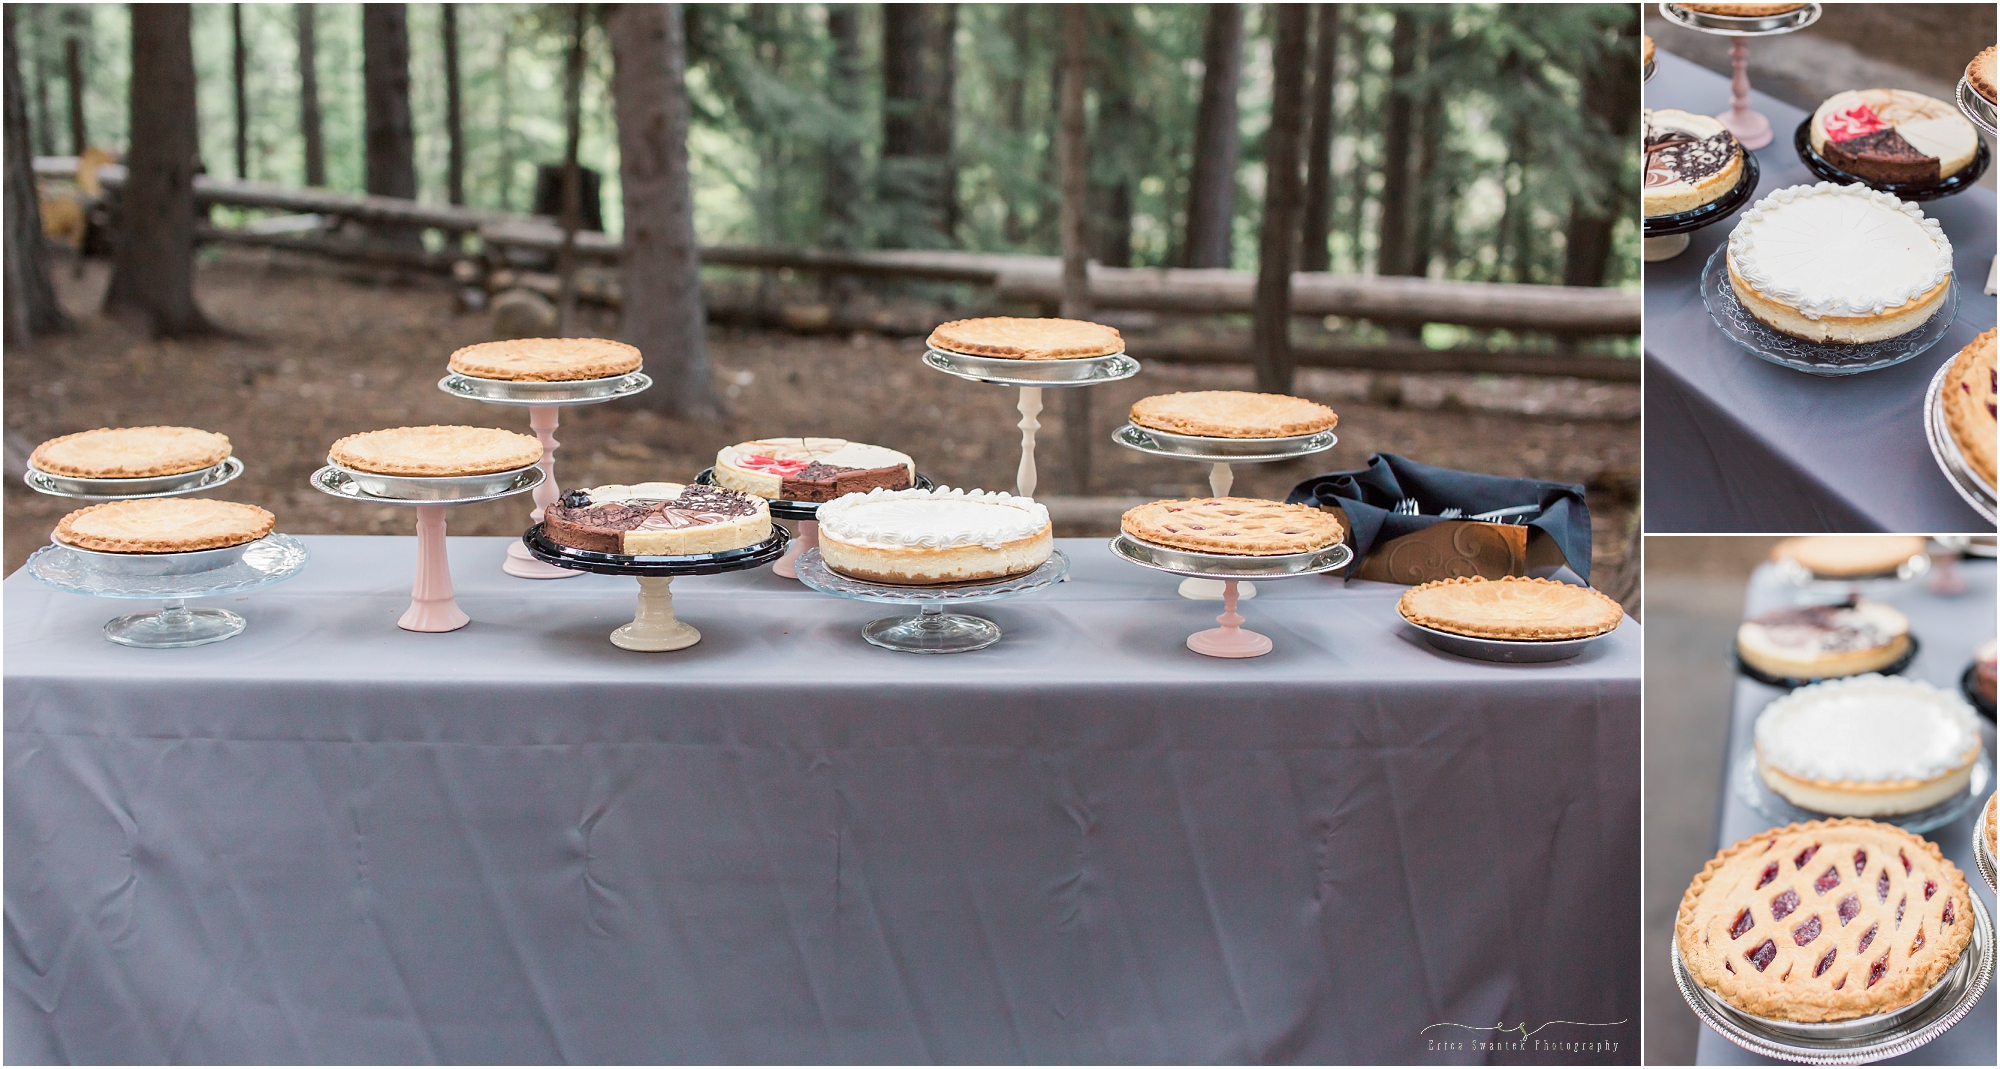 Pies instead of a traditional wedding cake at this Bend, Oregon wedding at Skyliner's Lodge. 